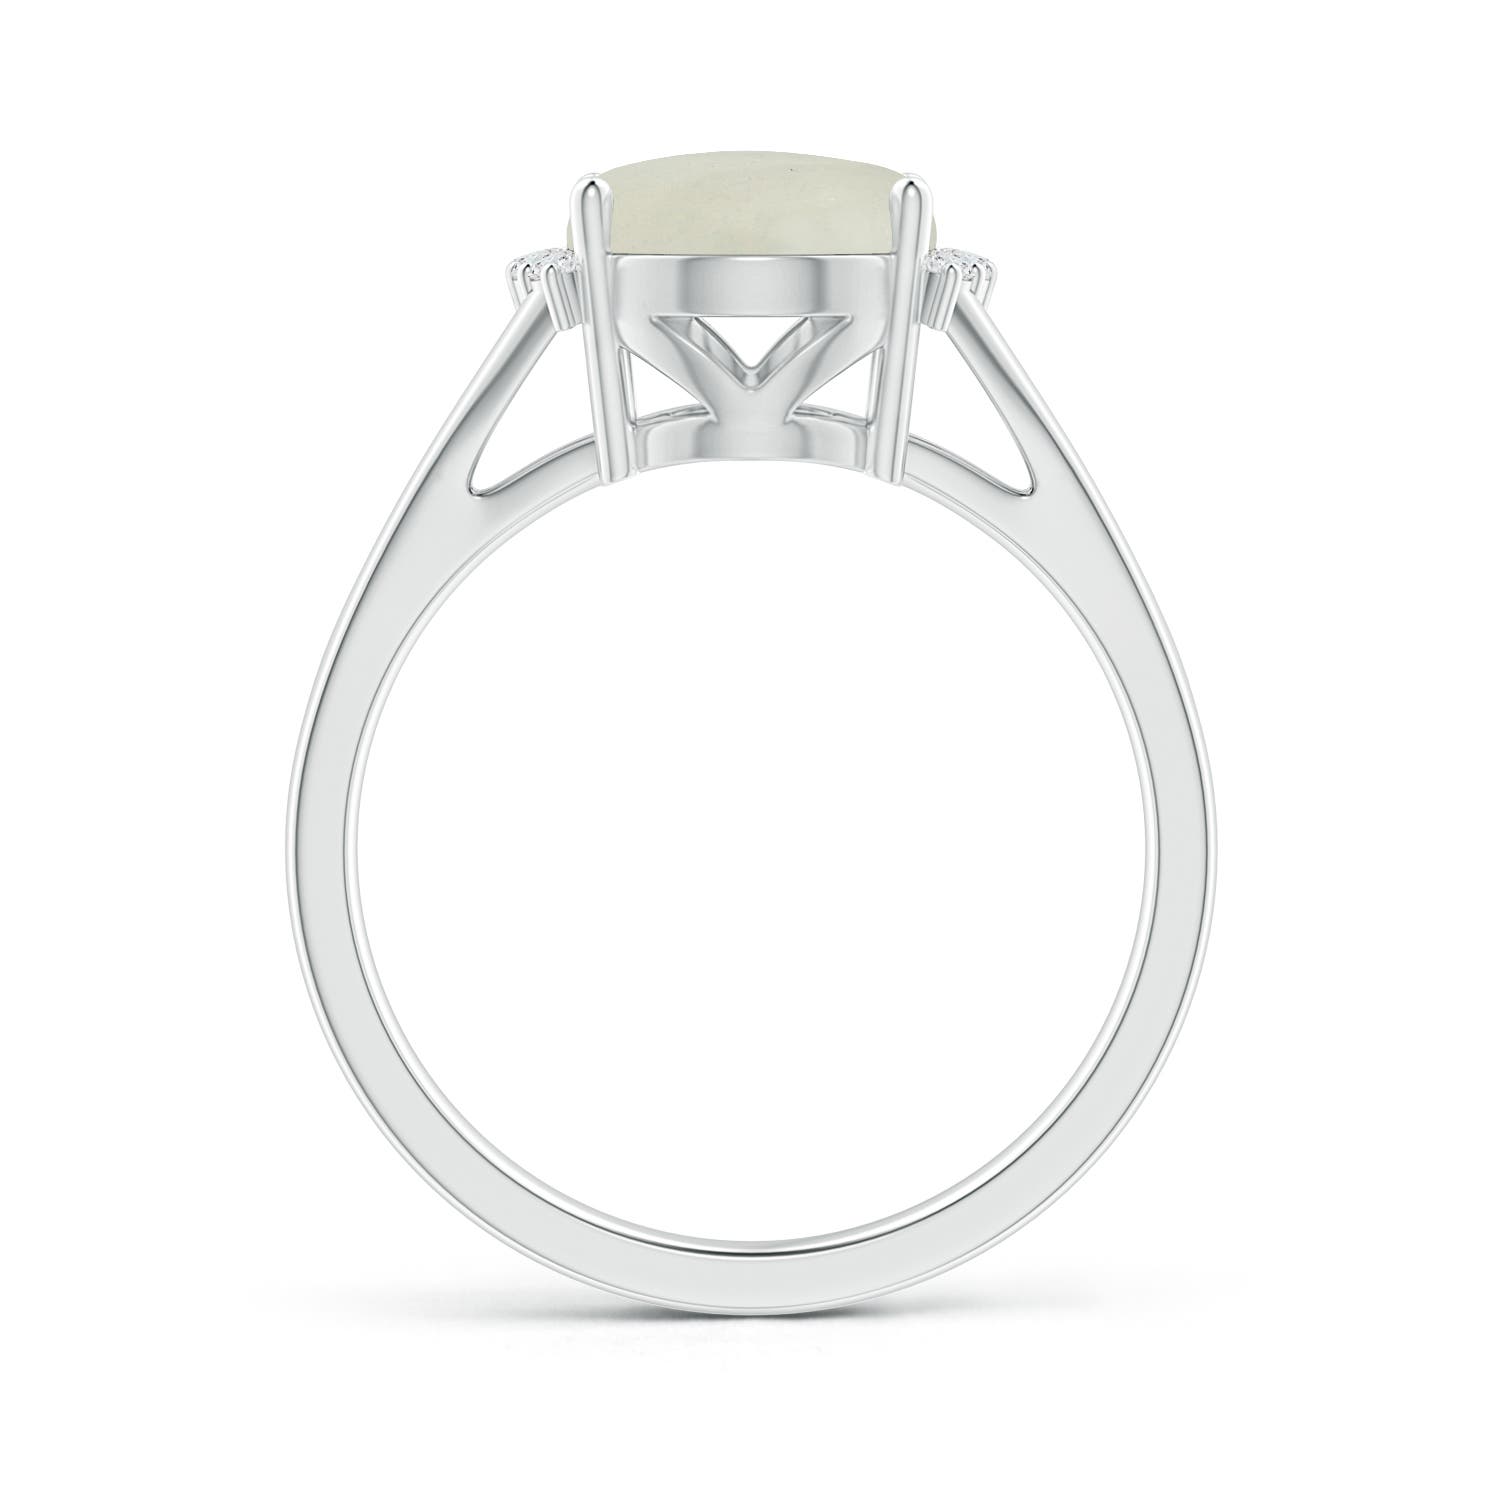 AA - Moonstone / 2.6 CT / 14 KT White Gold